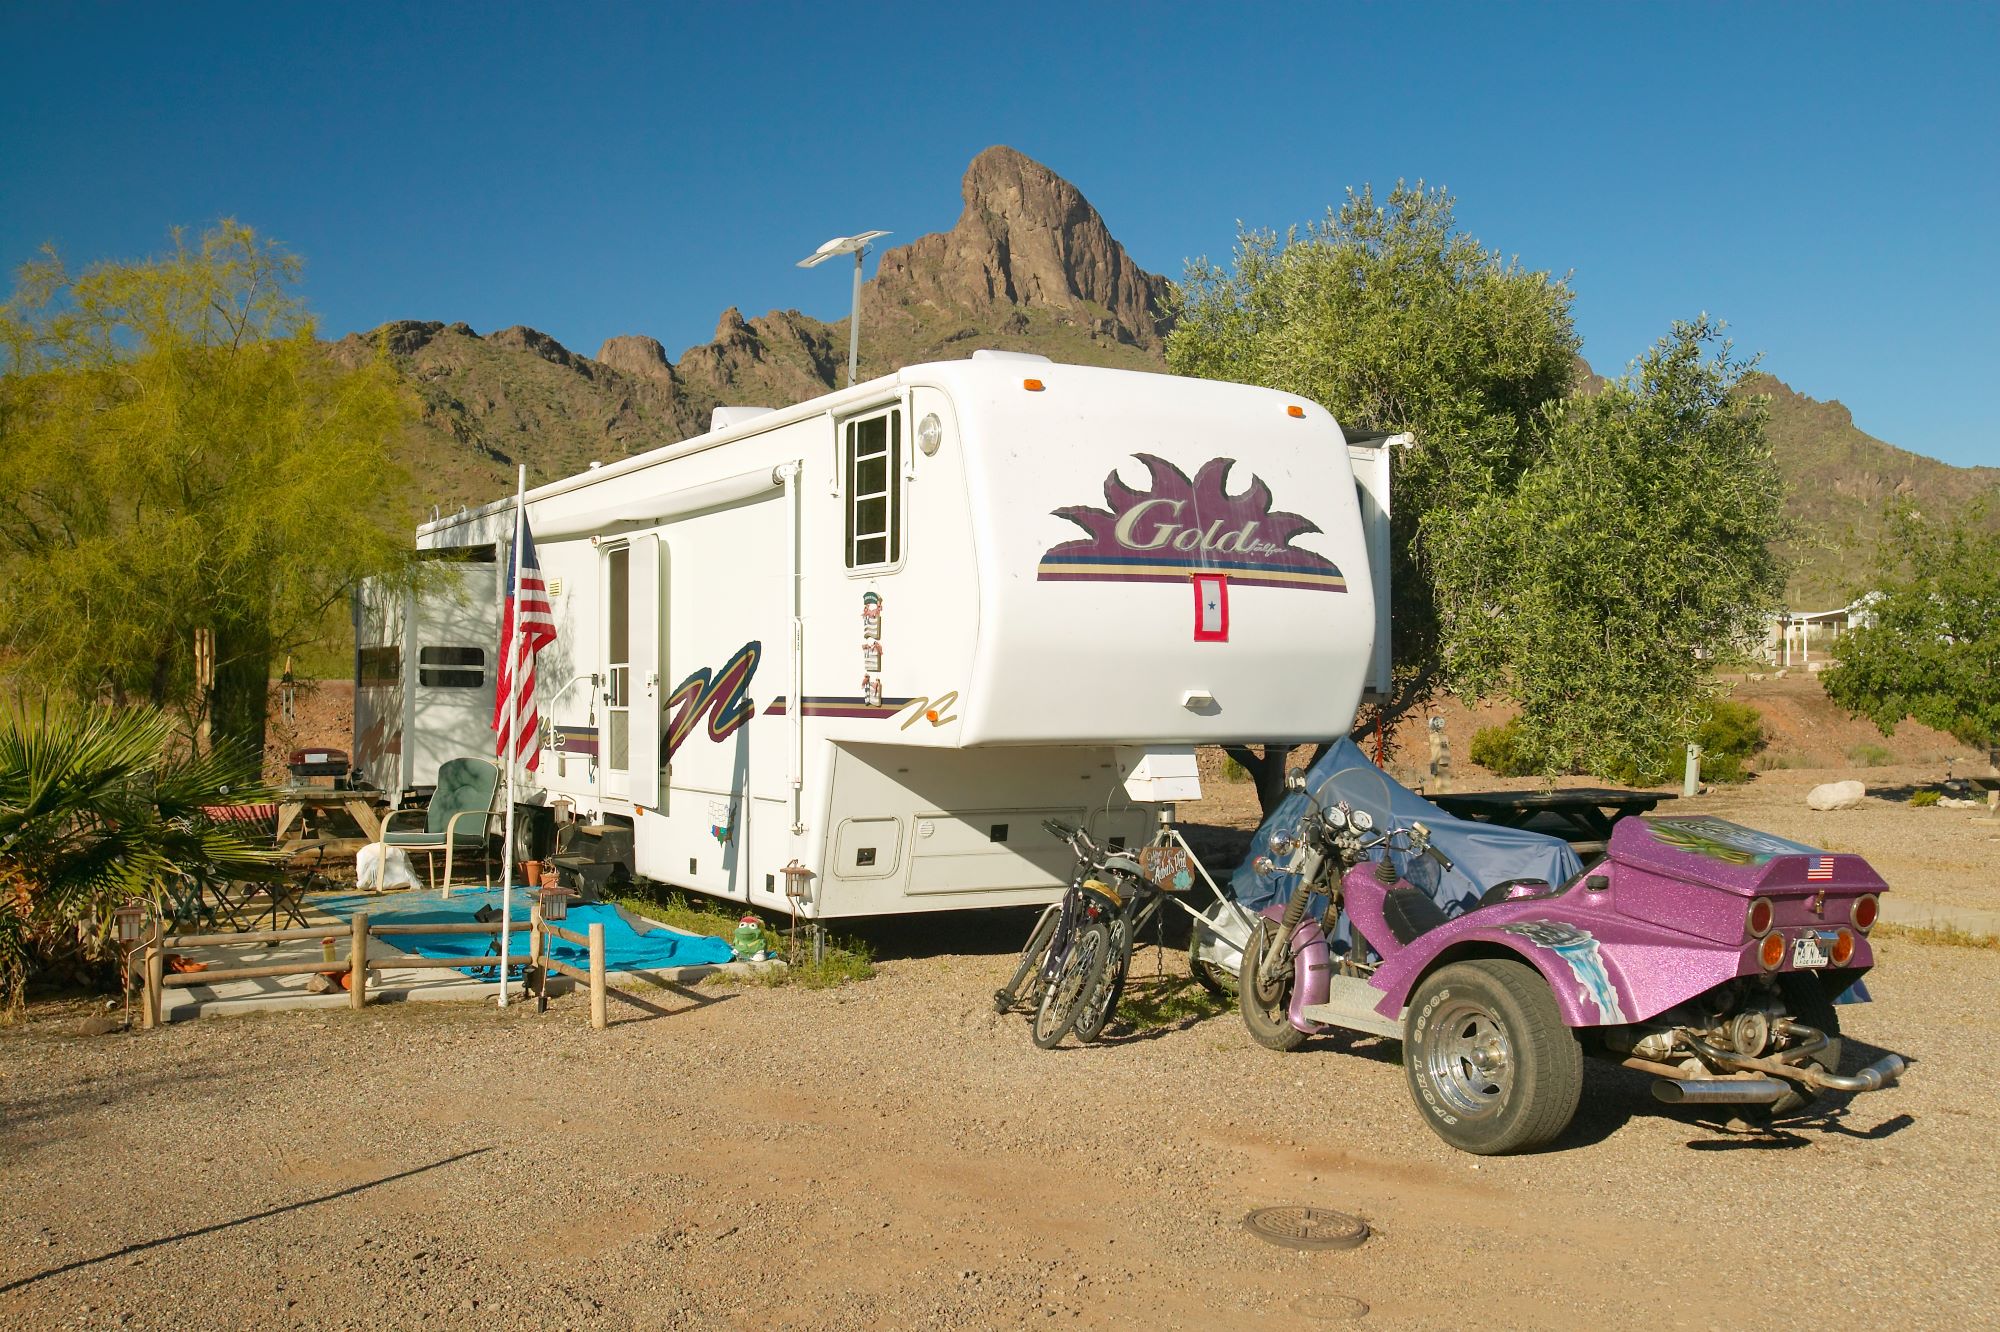 An off-road RV parked in a desert mountain area with an American flag, set of bikes, and an ATV